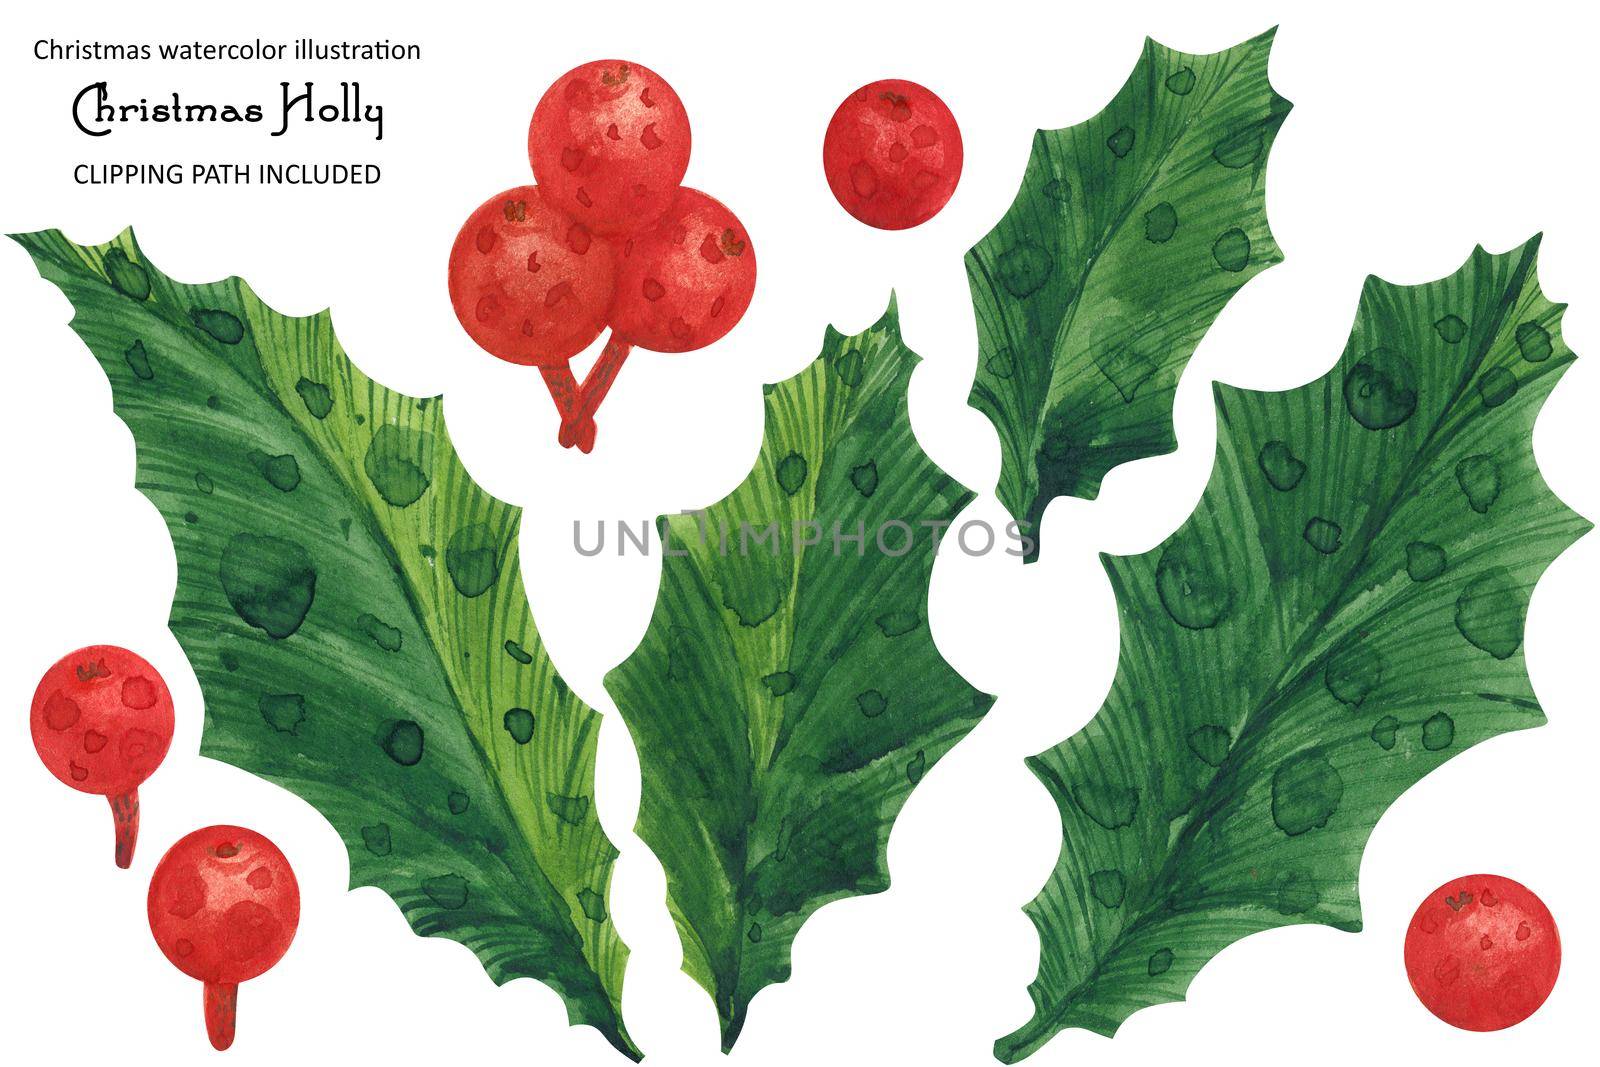 Christmas Holly watercolor art of green leaves and red berries, isolated watercolor and clipping path